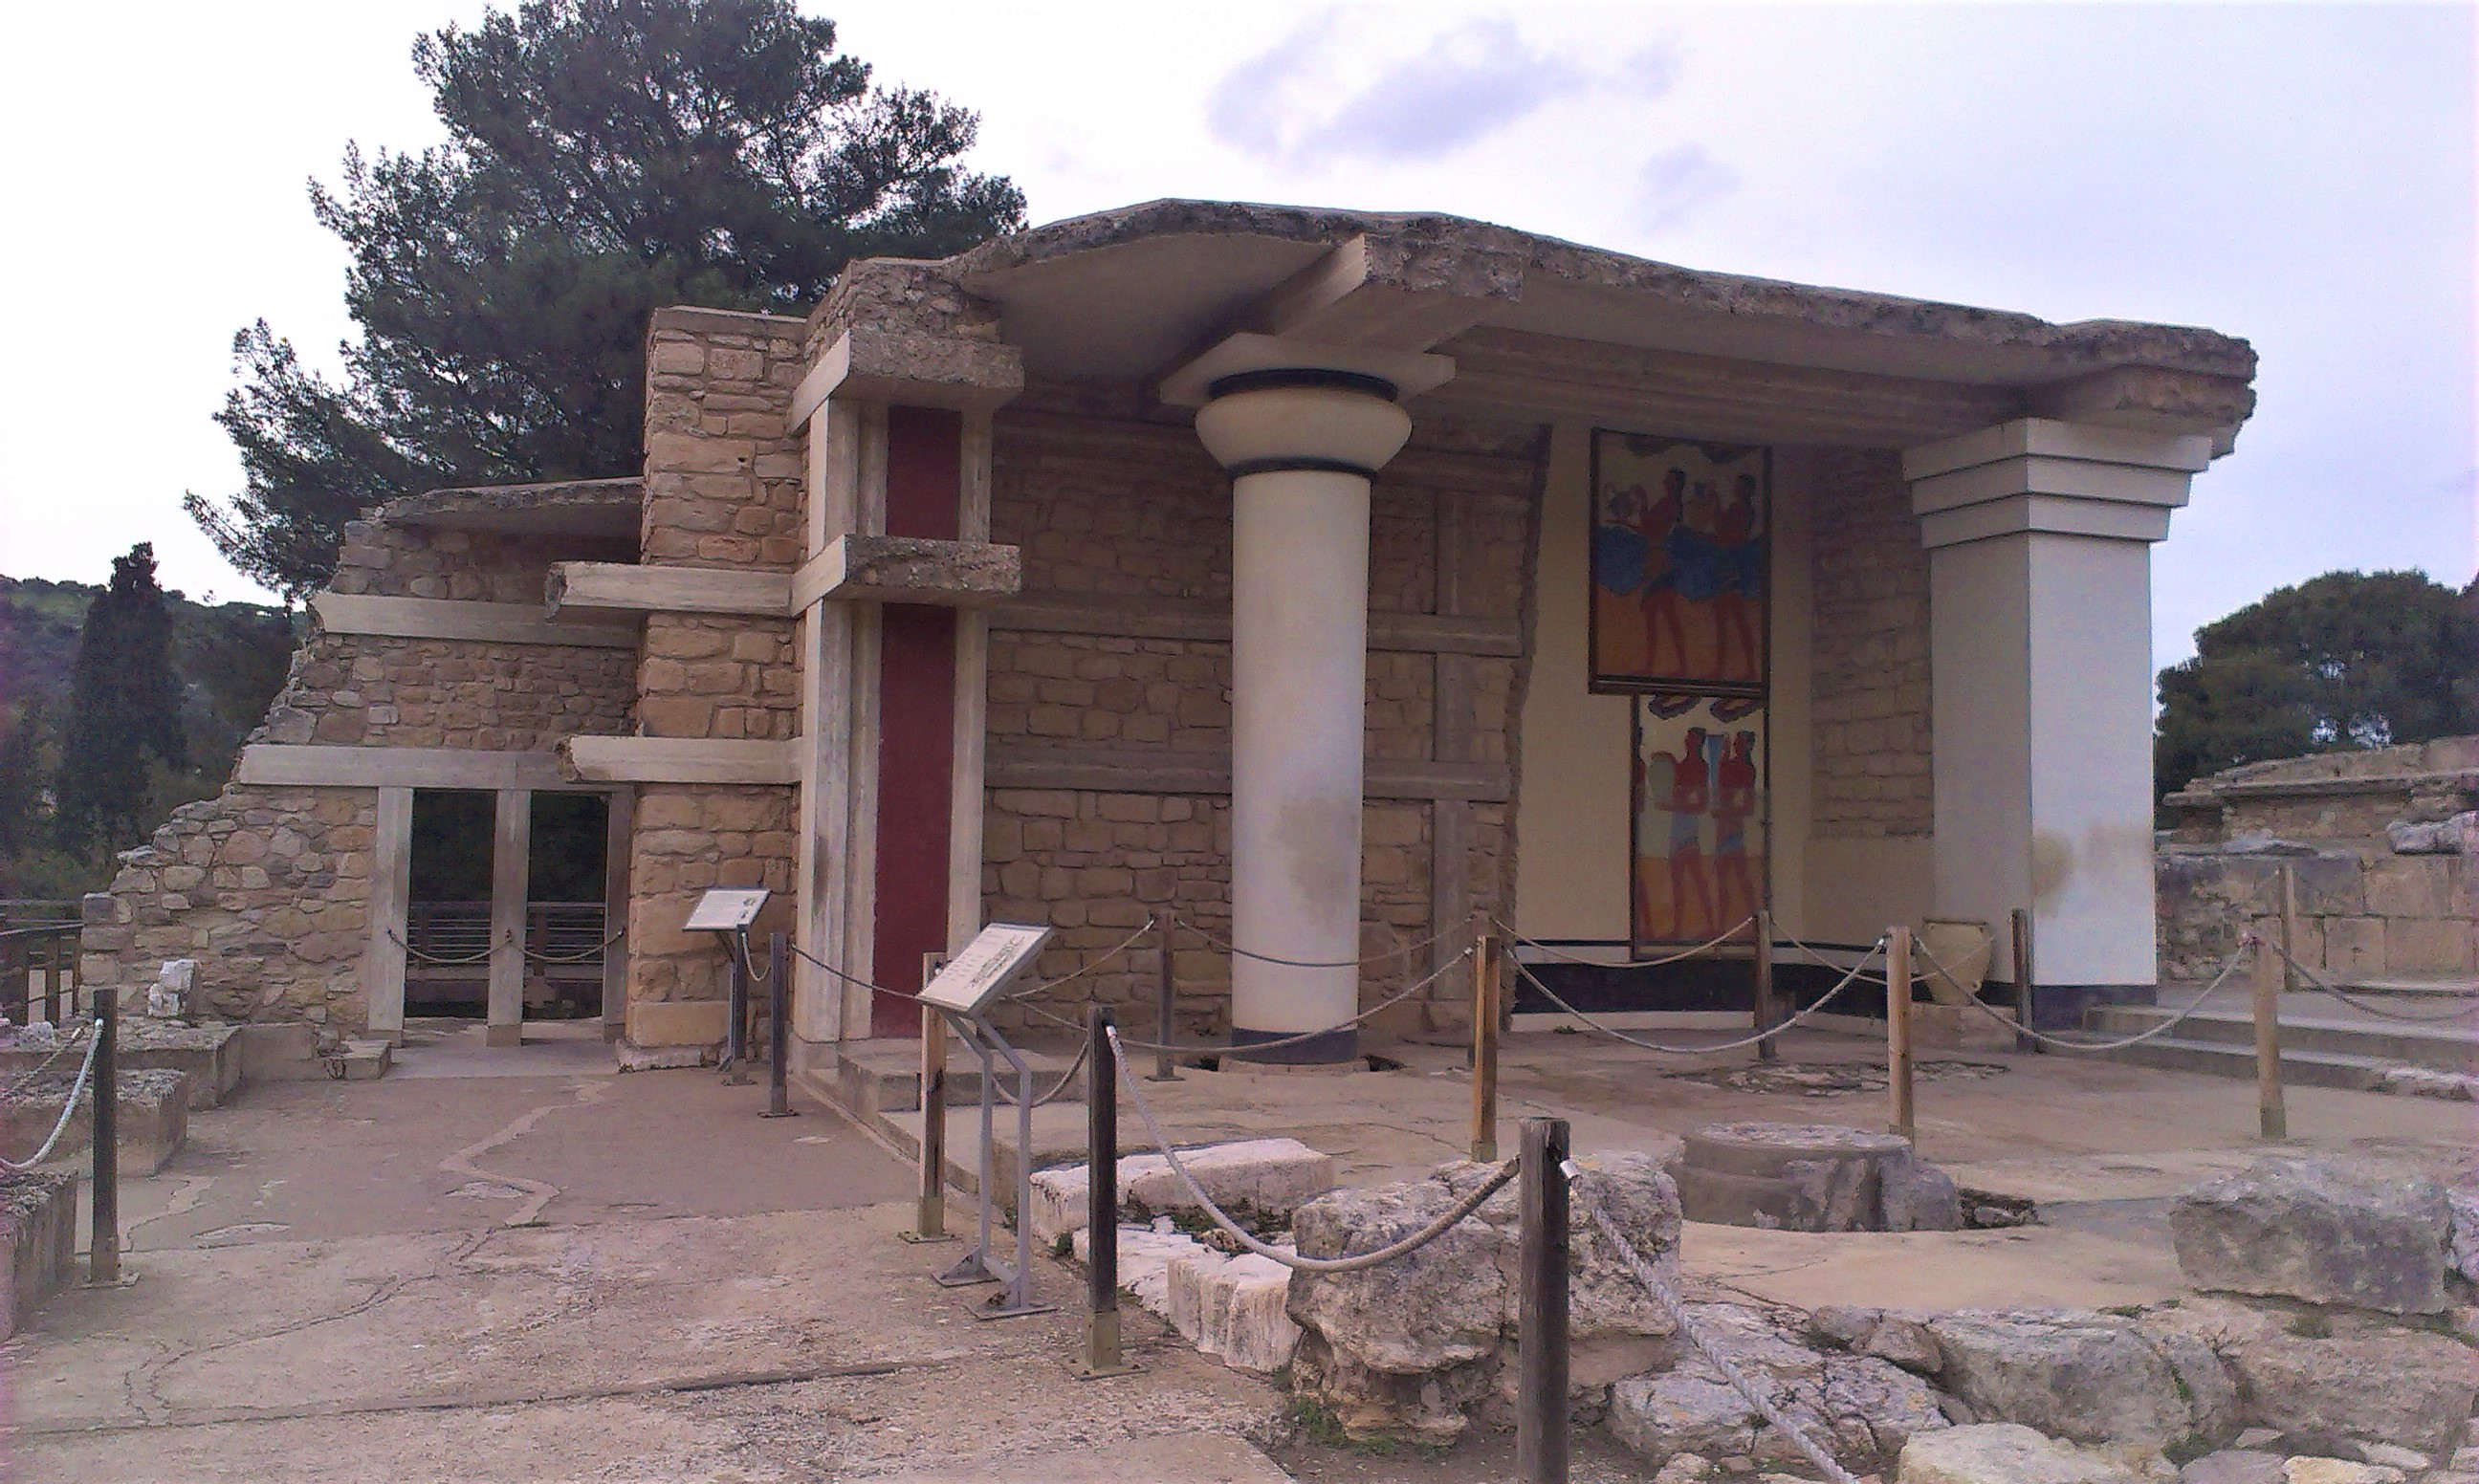 entrance section to the palatial complex of Knossos, the legendary palace of King Minos